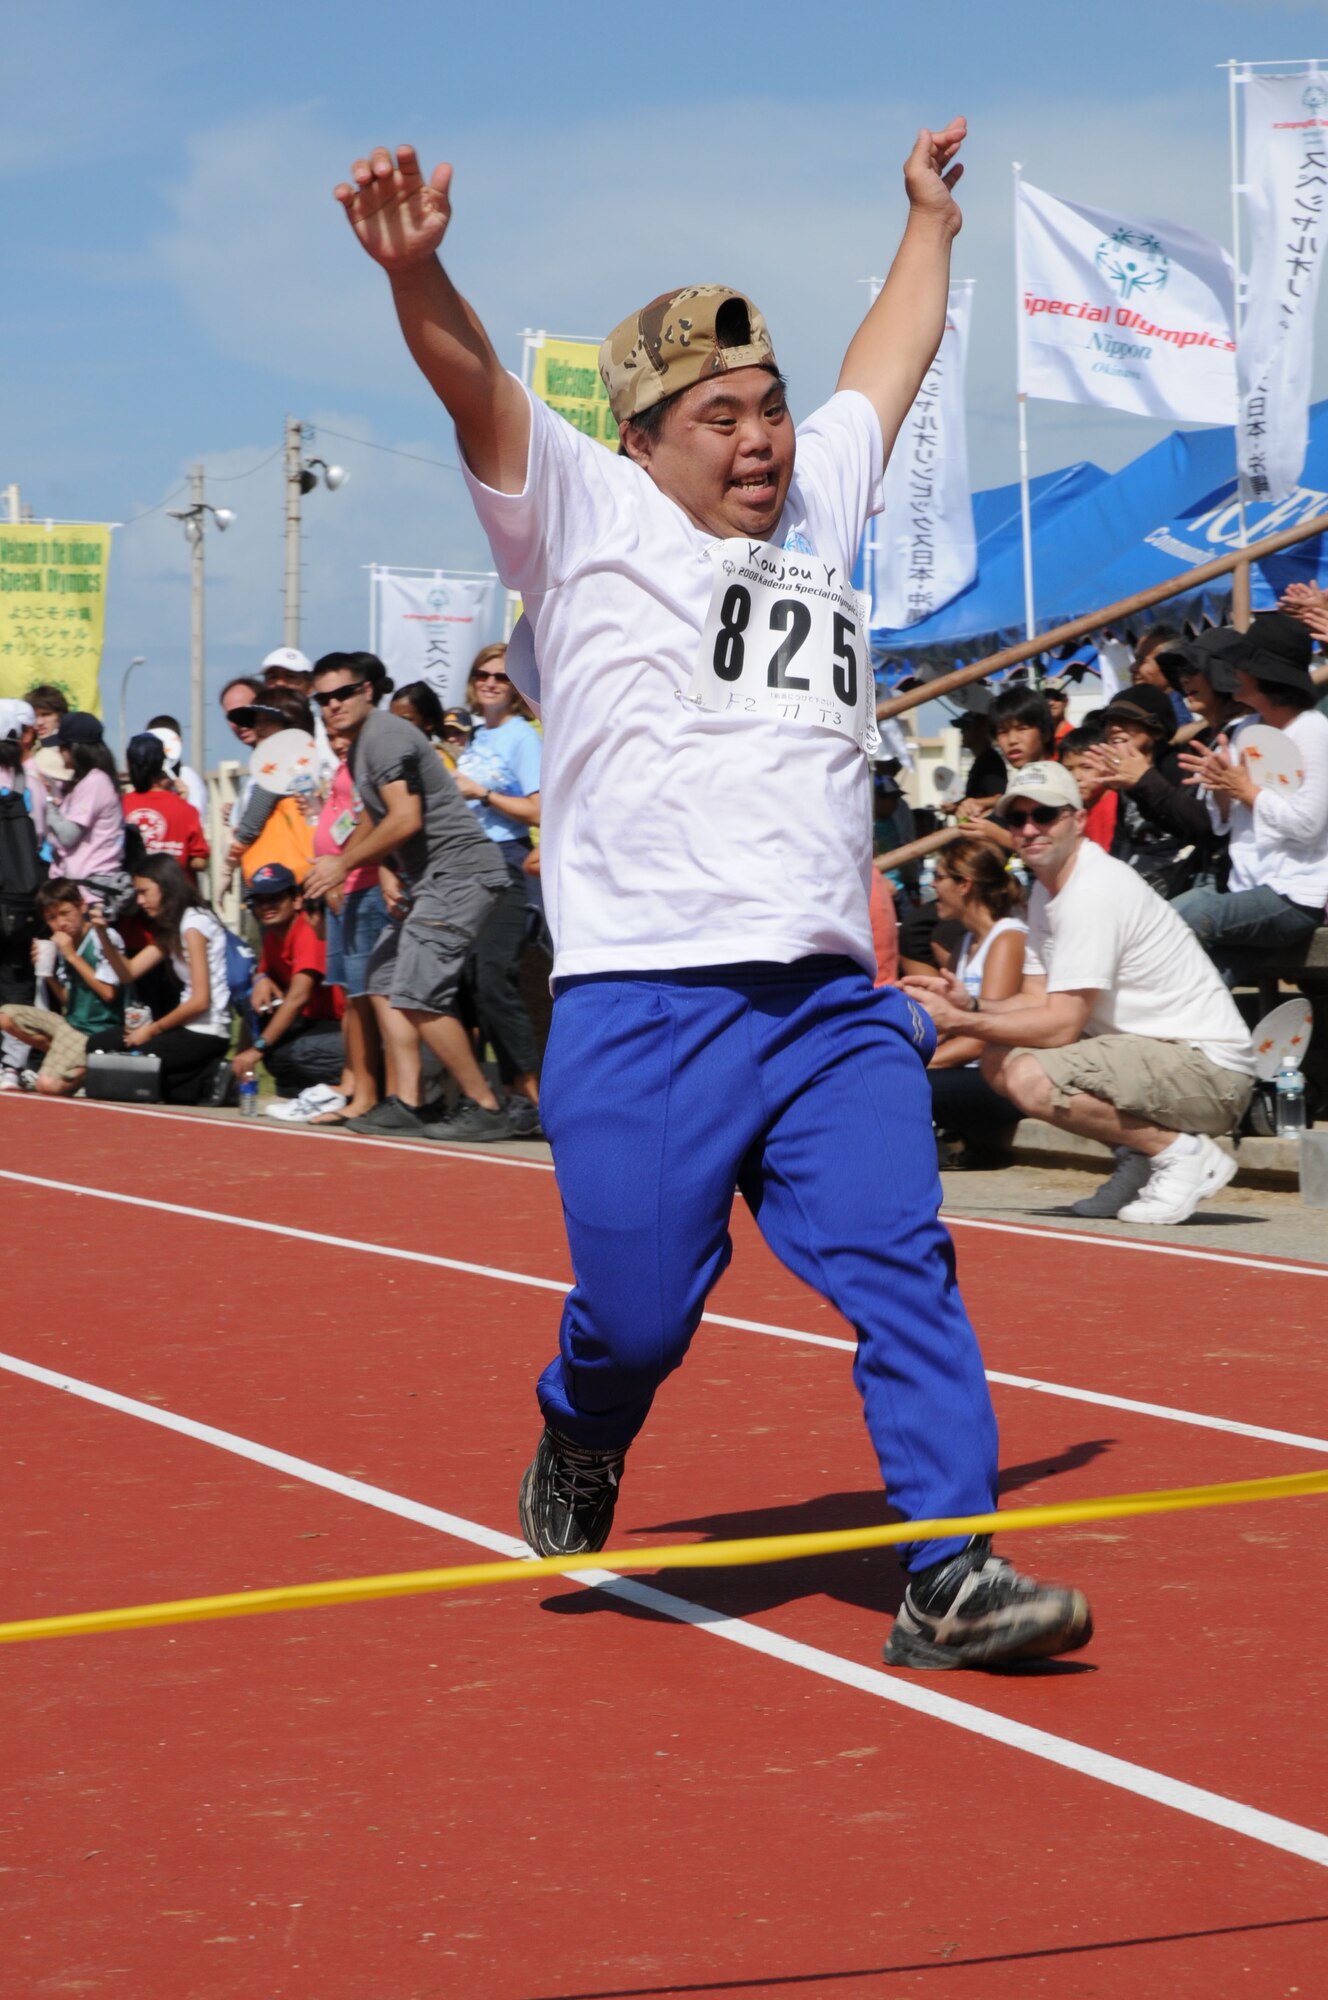 Koujou-san, a Special Olympics participant, raises his hands in excitement after crossing the finish line during the 30 meter dash Nov. 8, 2008, Kadena Air Base, Japan. Kadena hosted the 9th Annual Special Olympic Games and Art Festival for special needs Okinawan and American adult and child athletes. (U.S. Air Force photo/Airman 1st Class Amanda Grabiec)                           